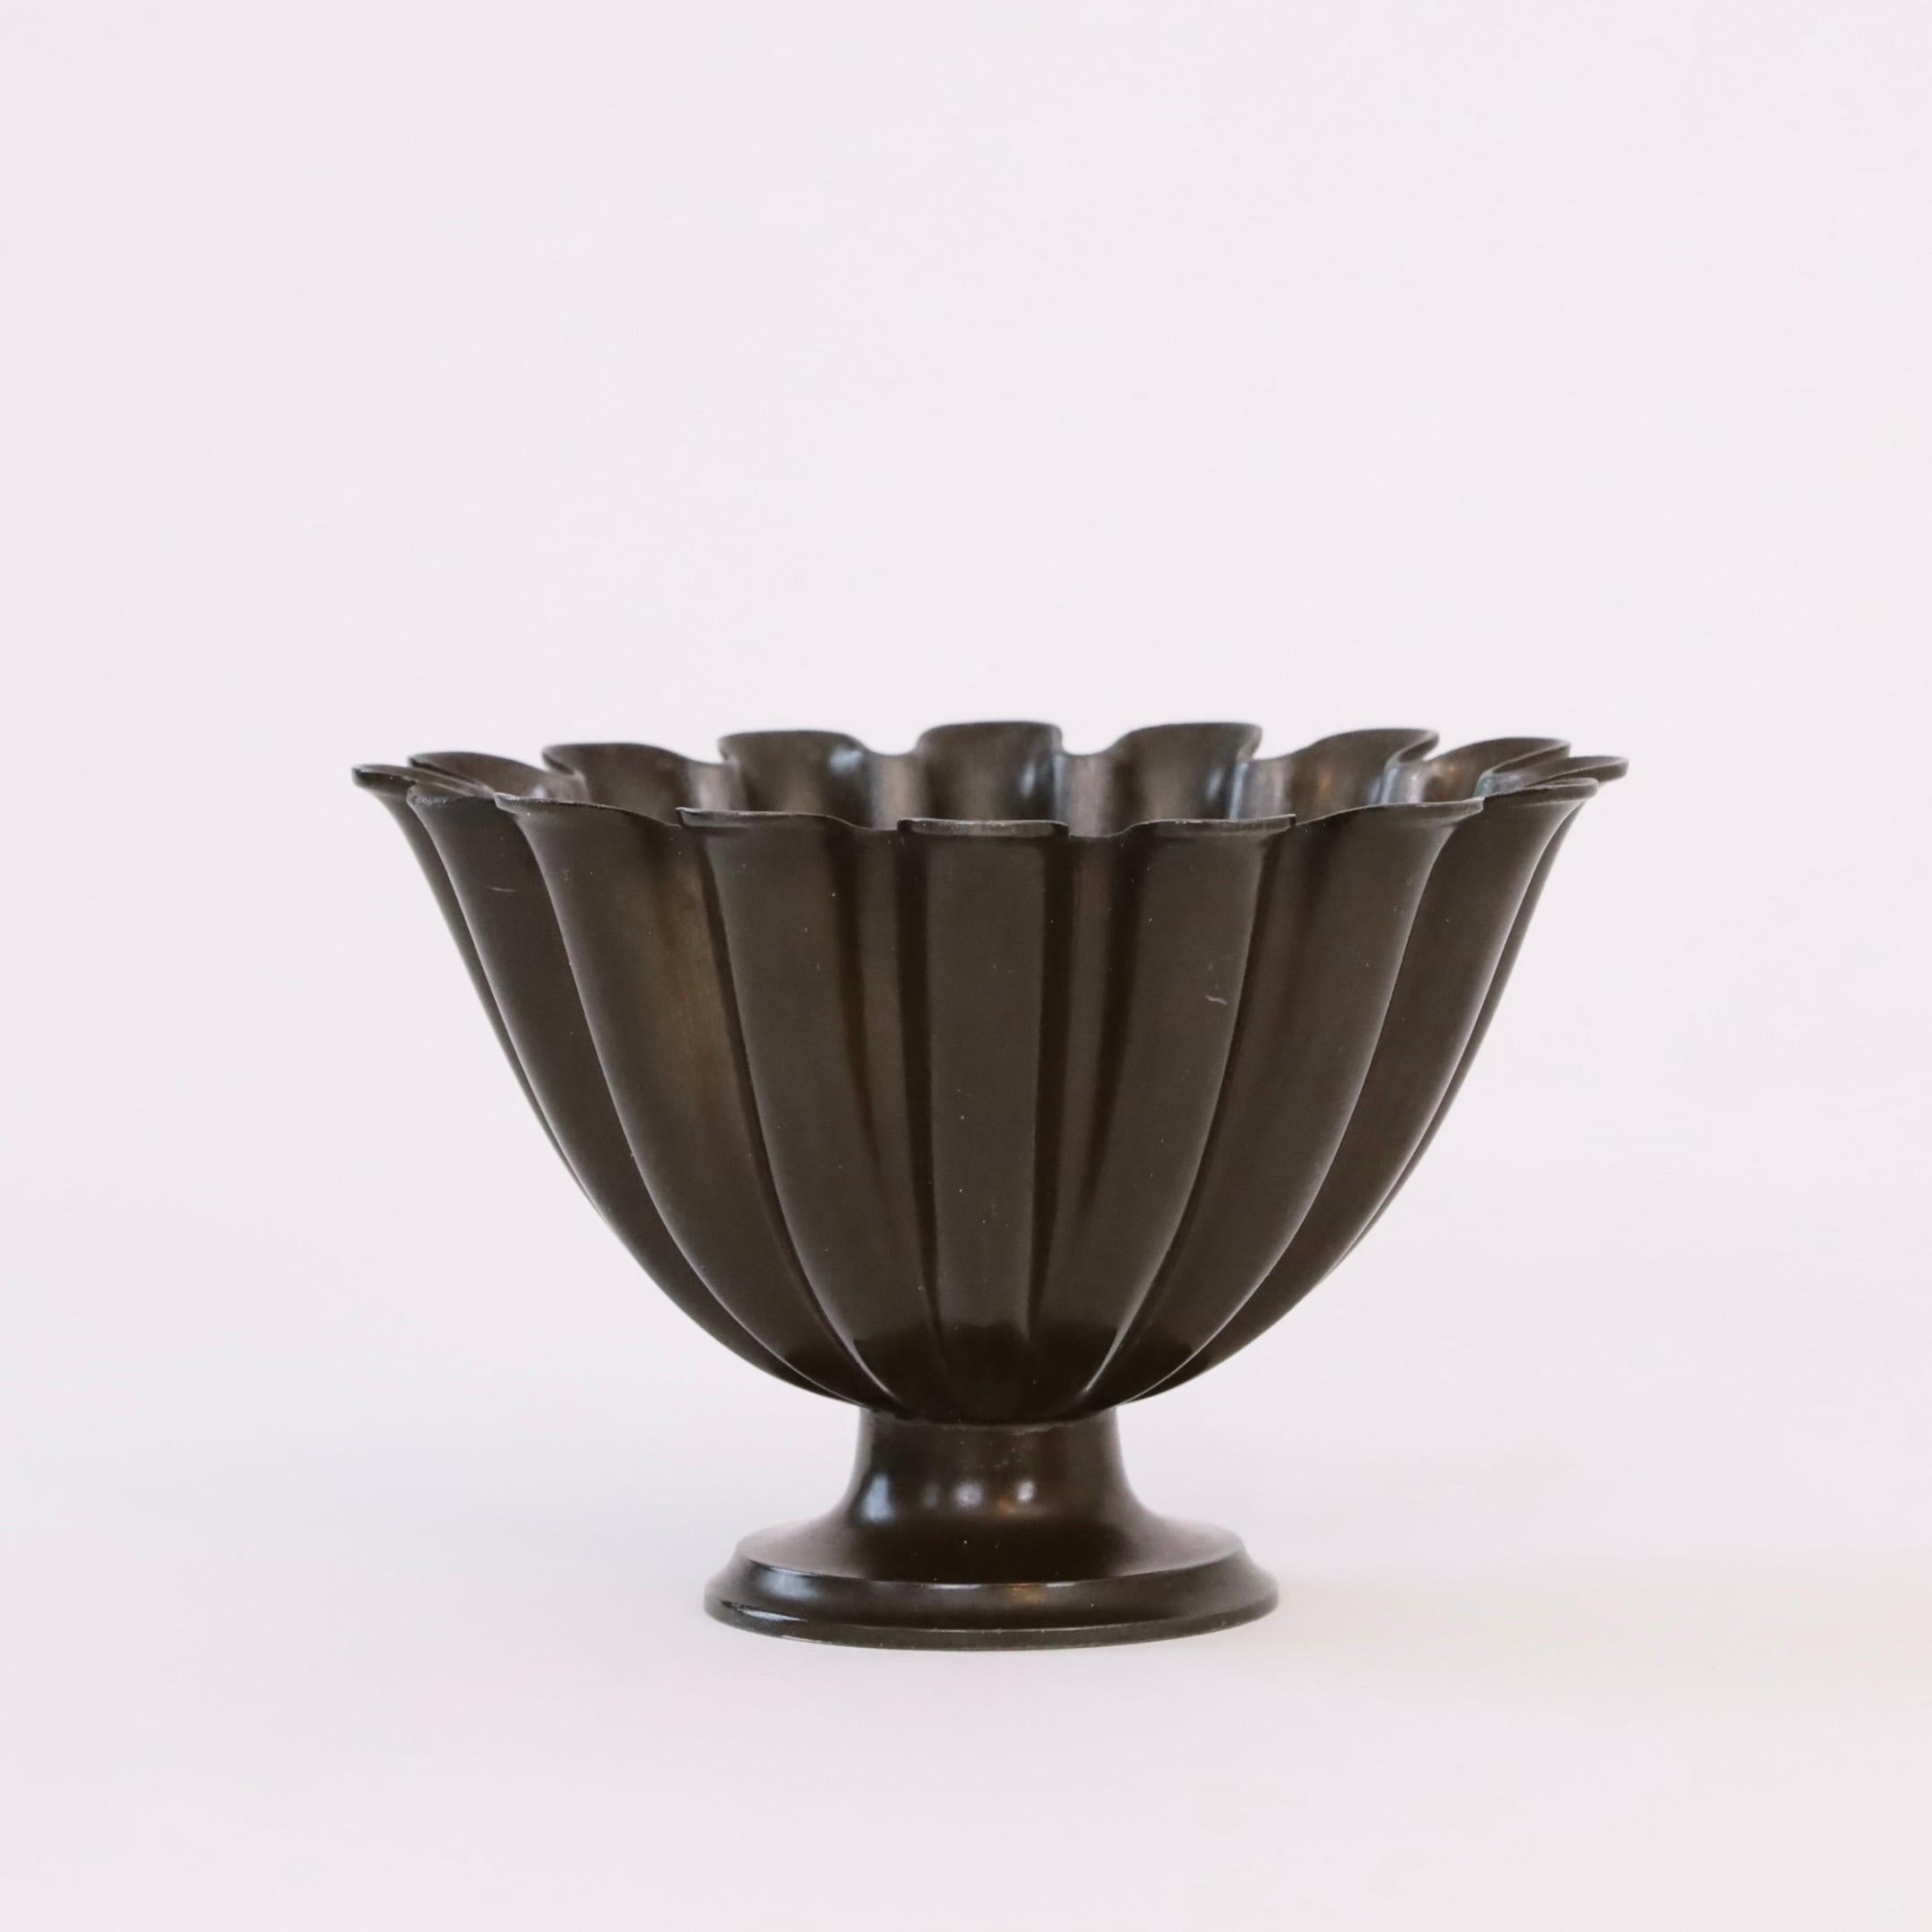 Scalloped pedestal discometal bowl by Just Andersen 1920s, Denmark For Sale 1